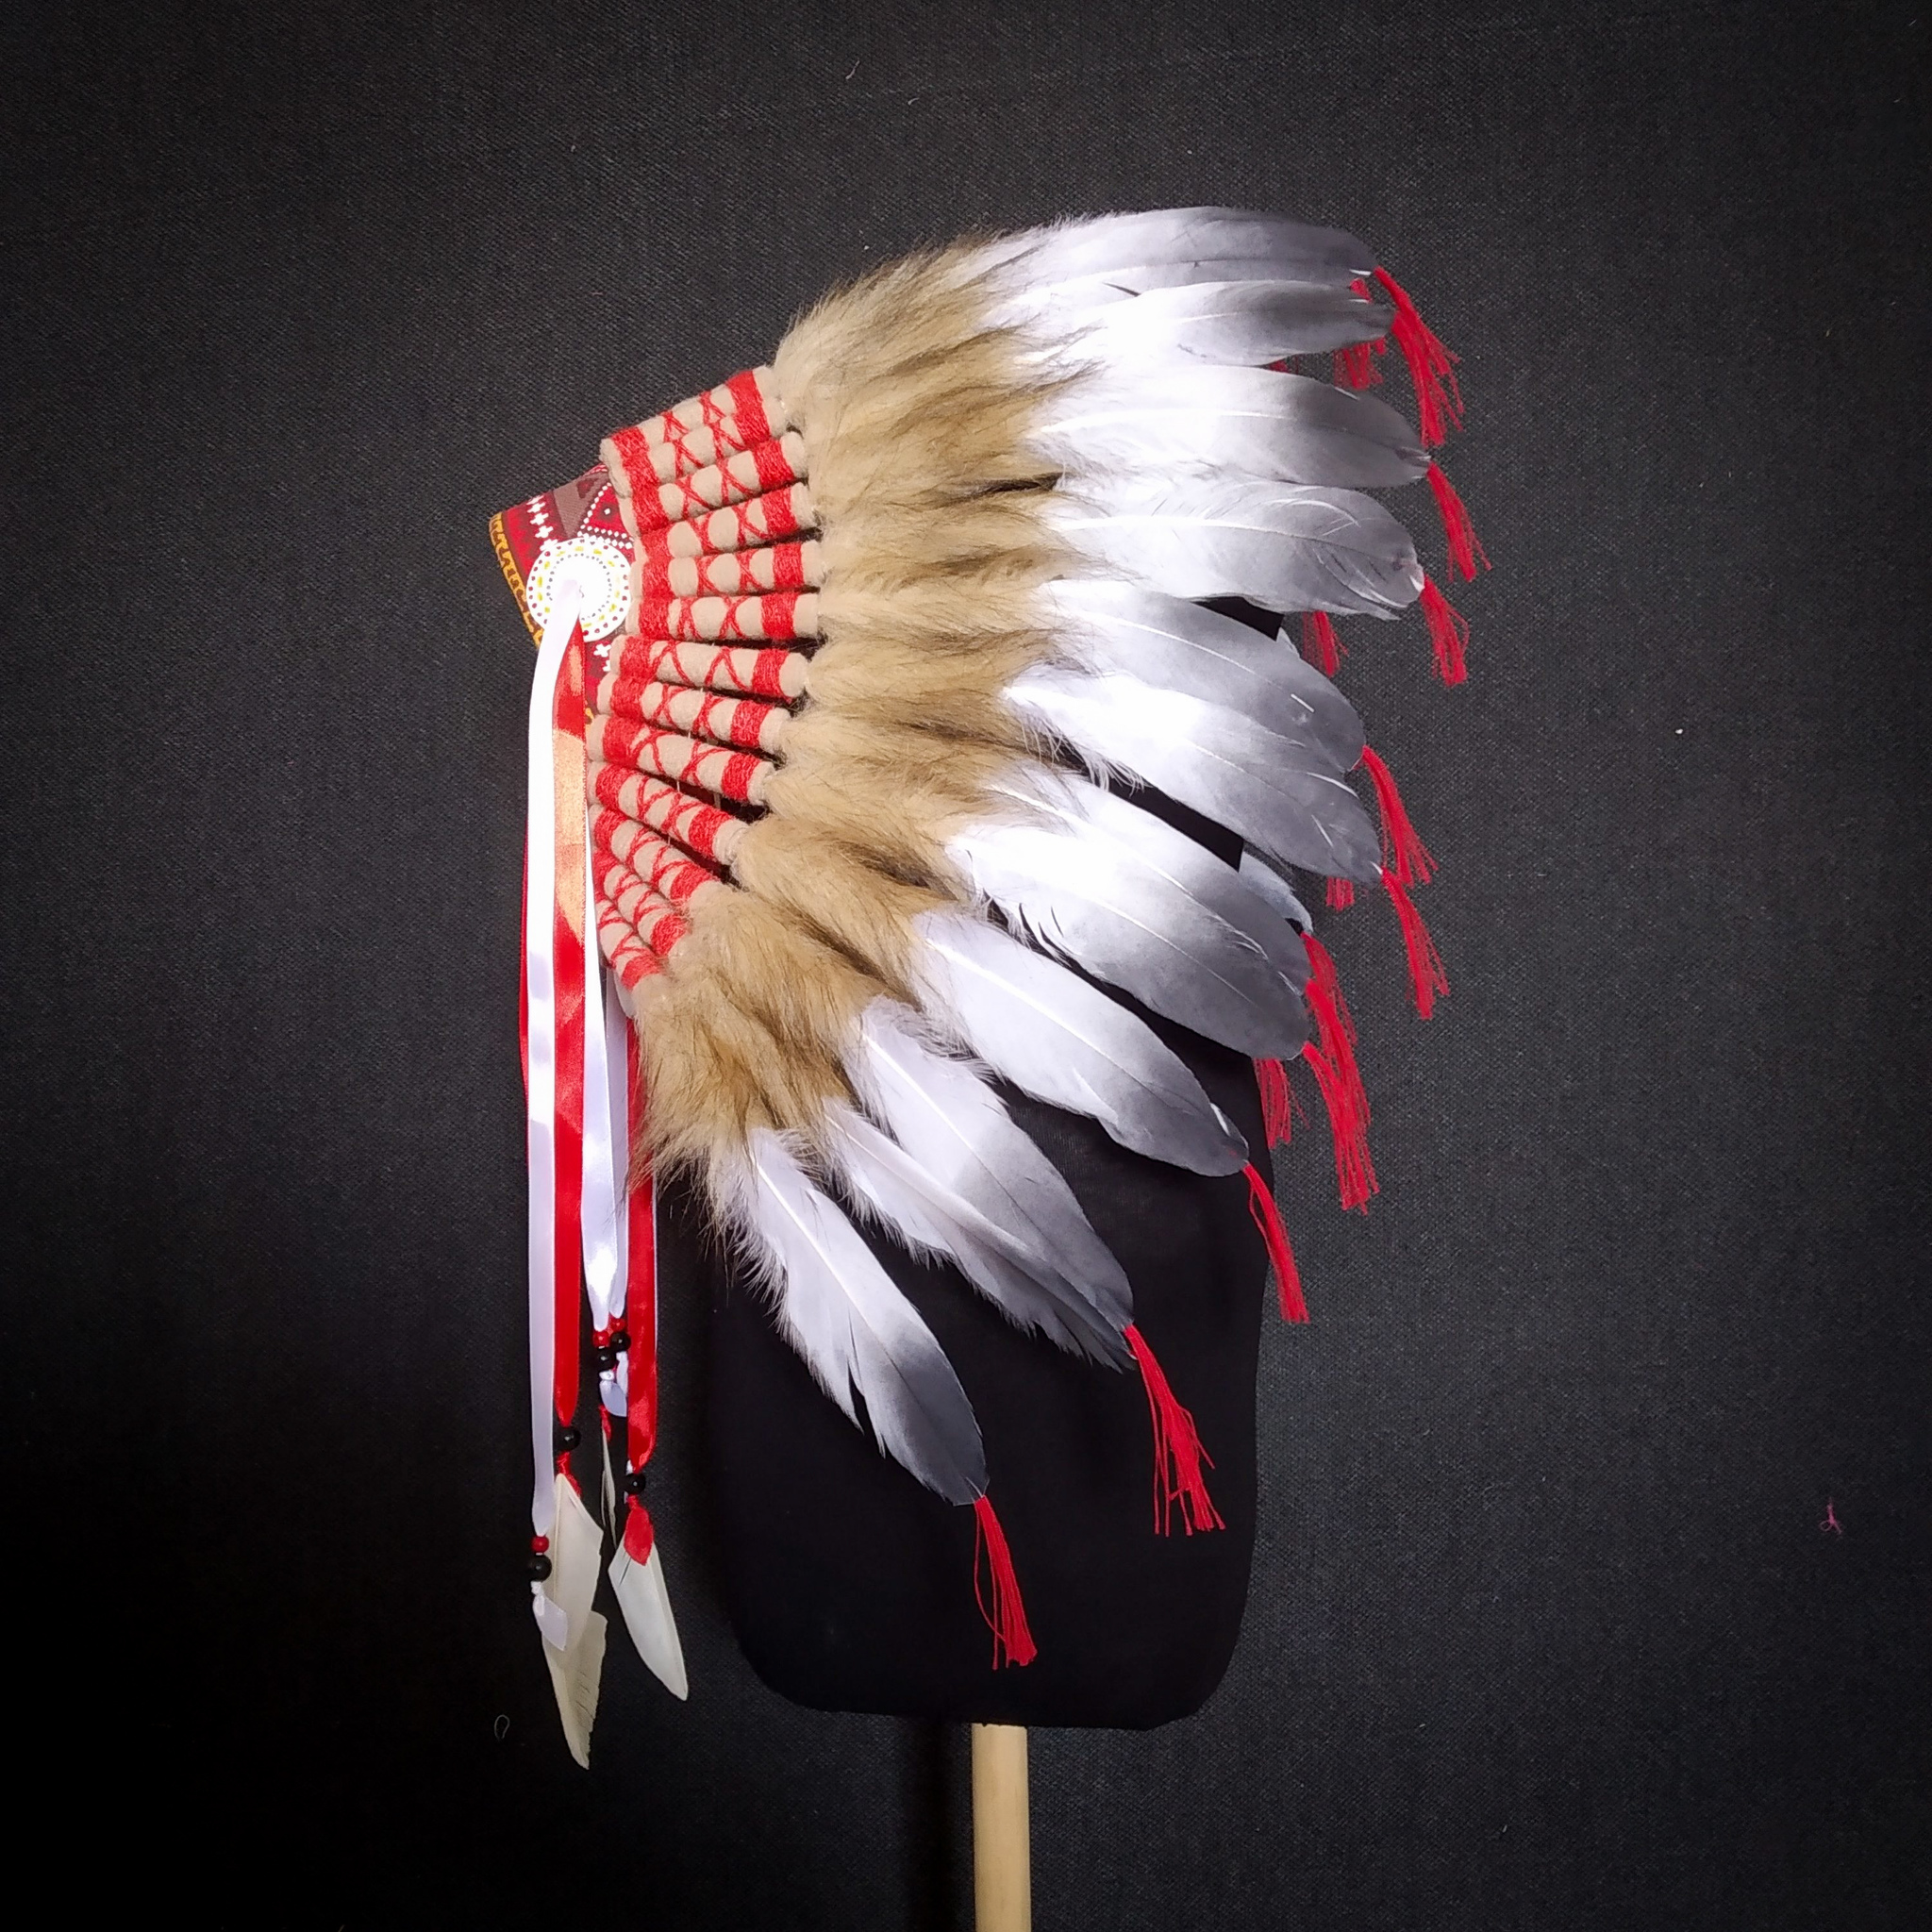 Indian headdresses - My, Roach, Indian Chief, Needlework without process, Indian's hat, Longpost